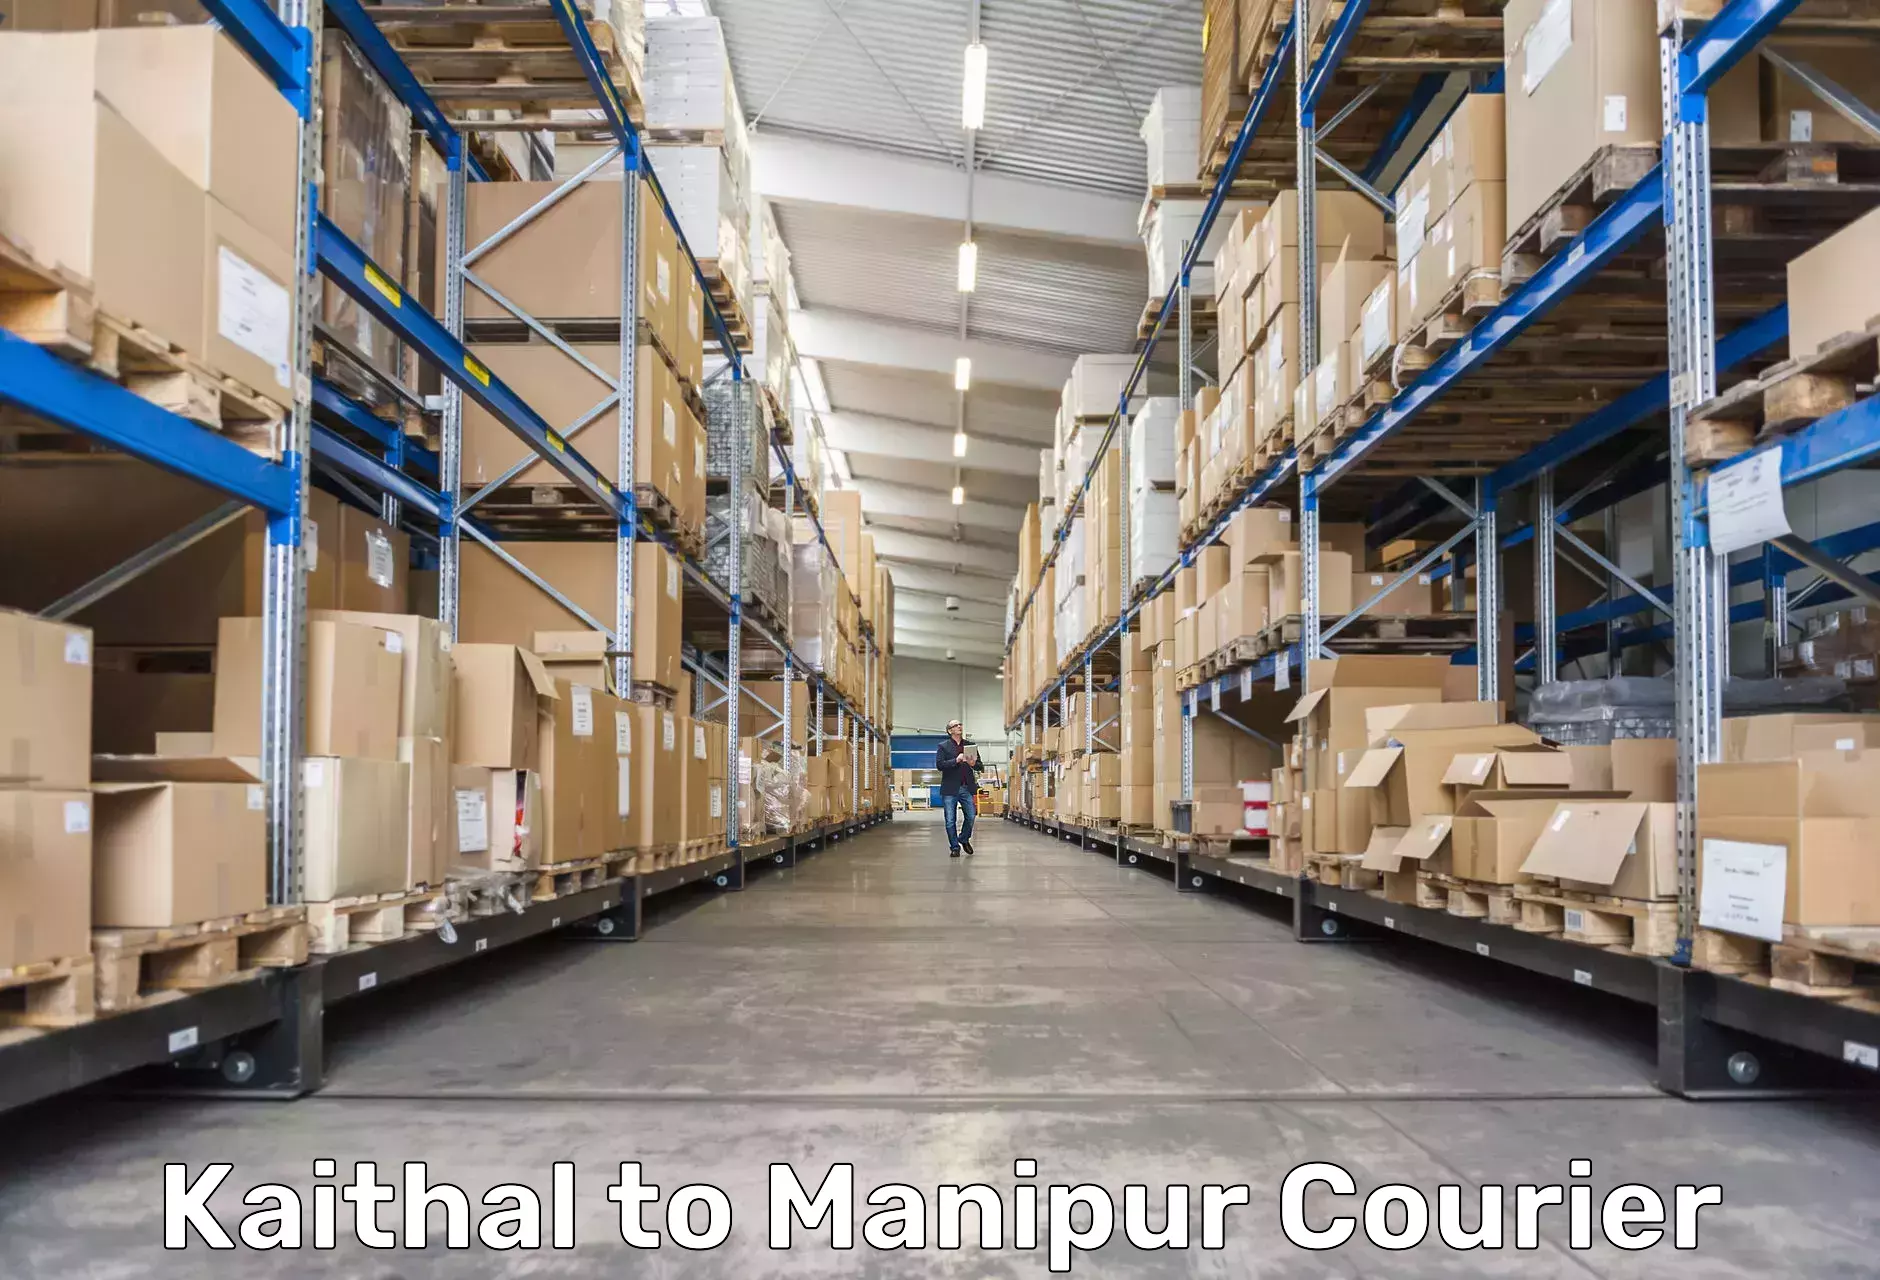 Online shipping calculator Kaithal to Imphal